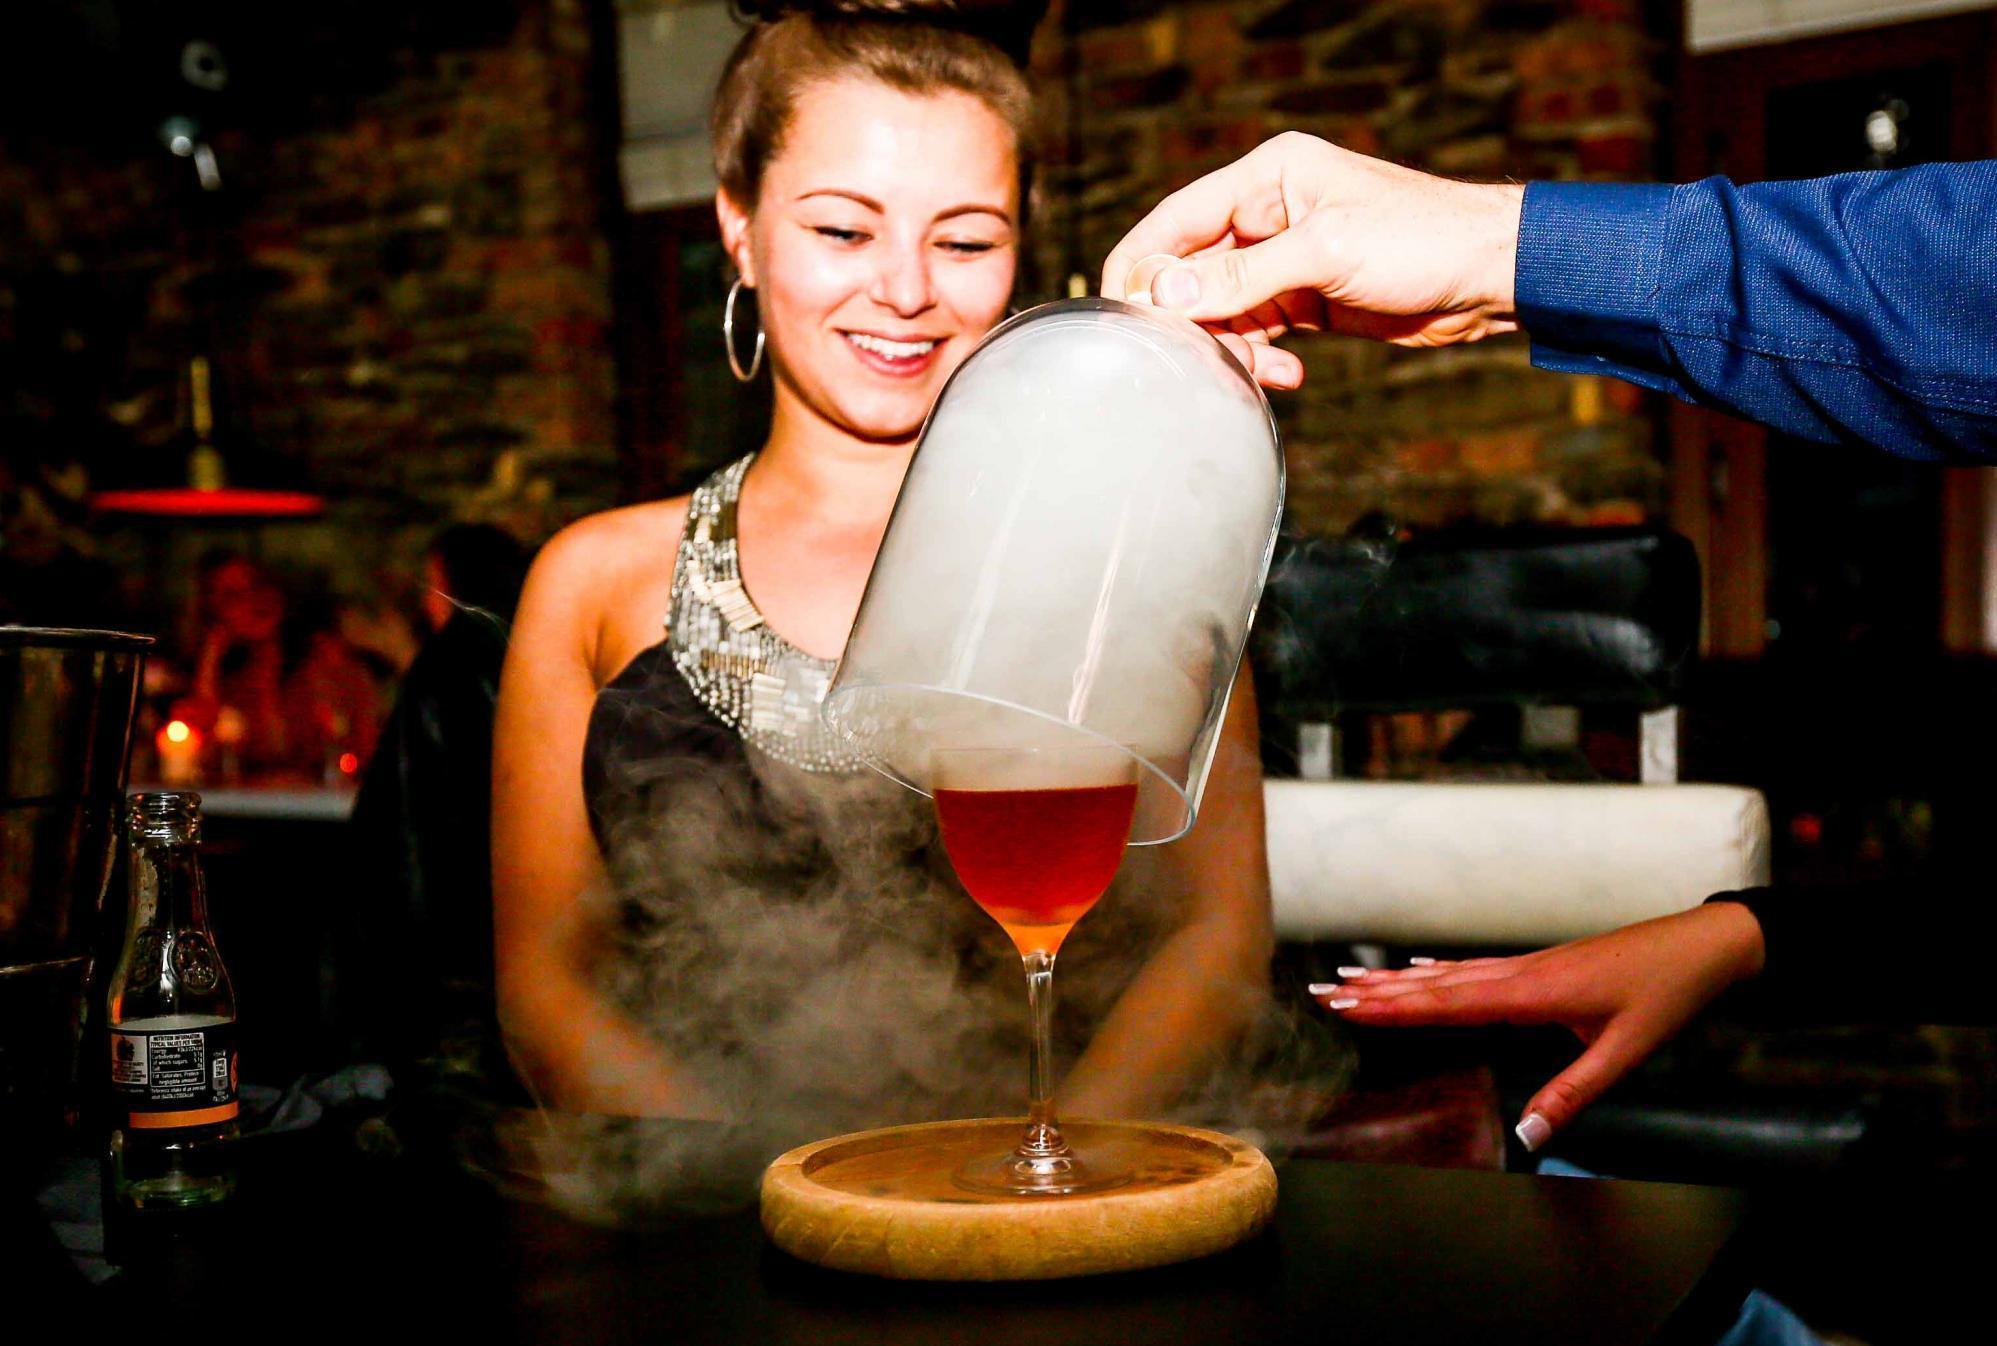 Enjoy a cocktail with a scientific slant at Lab 22 in Cardiff